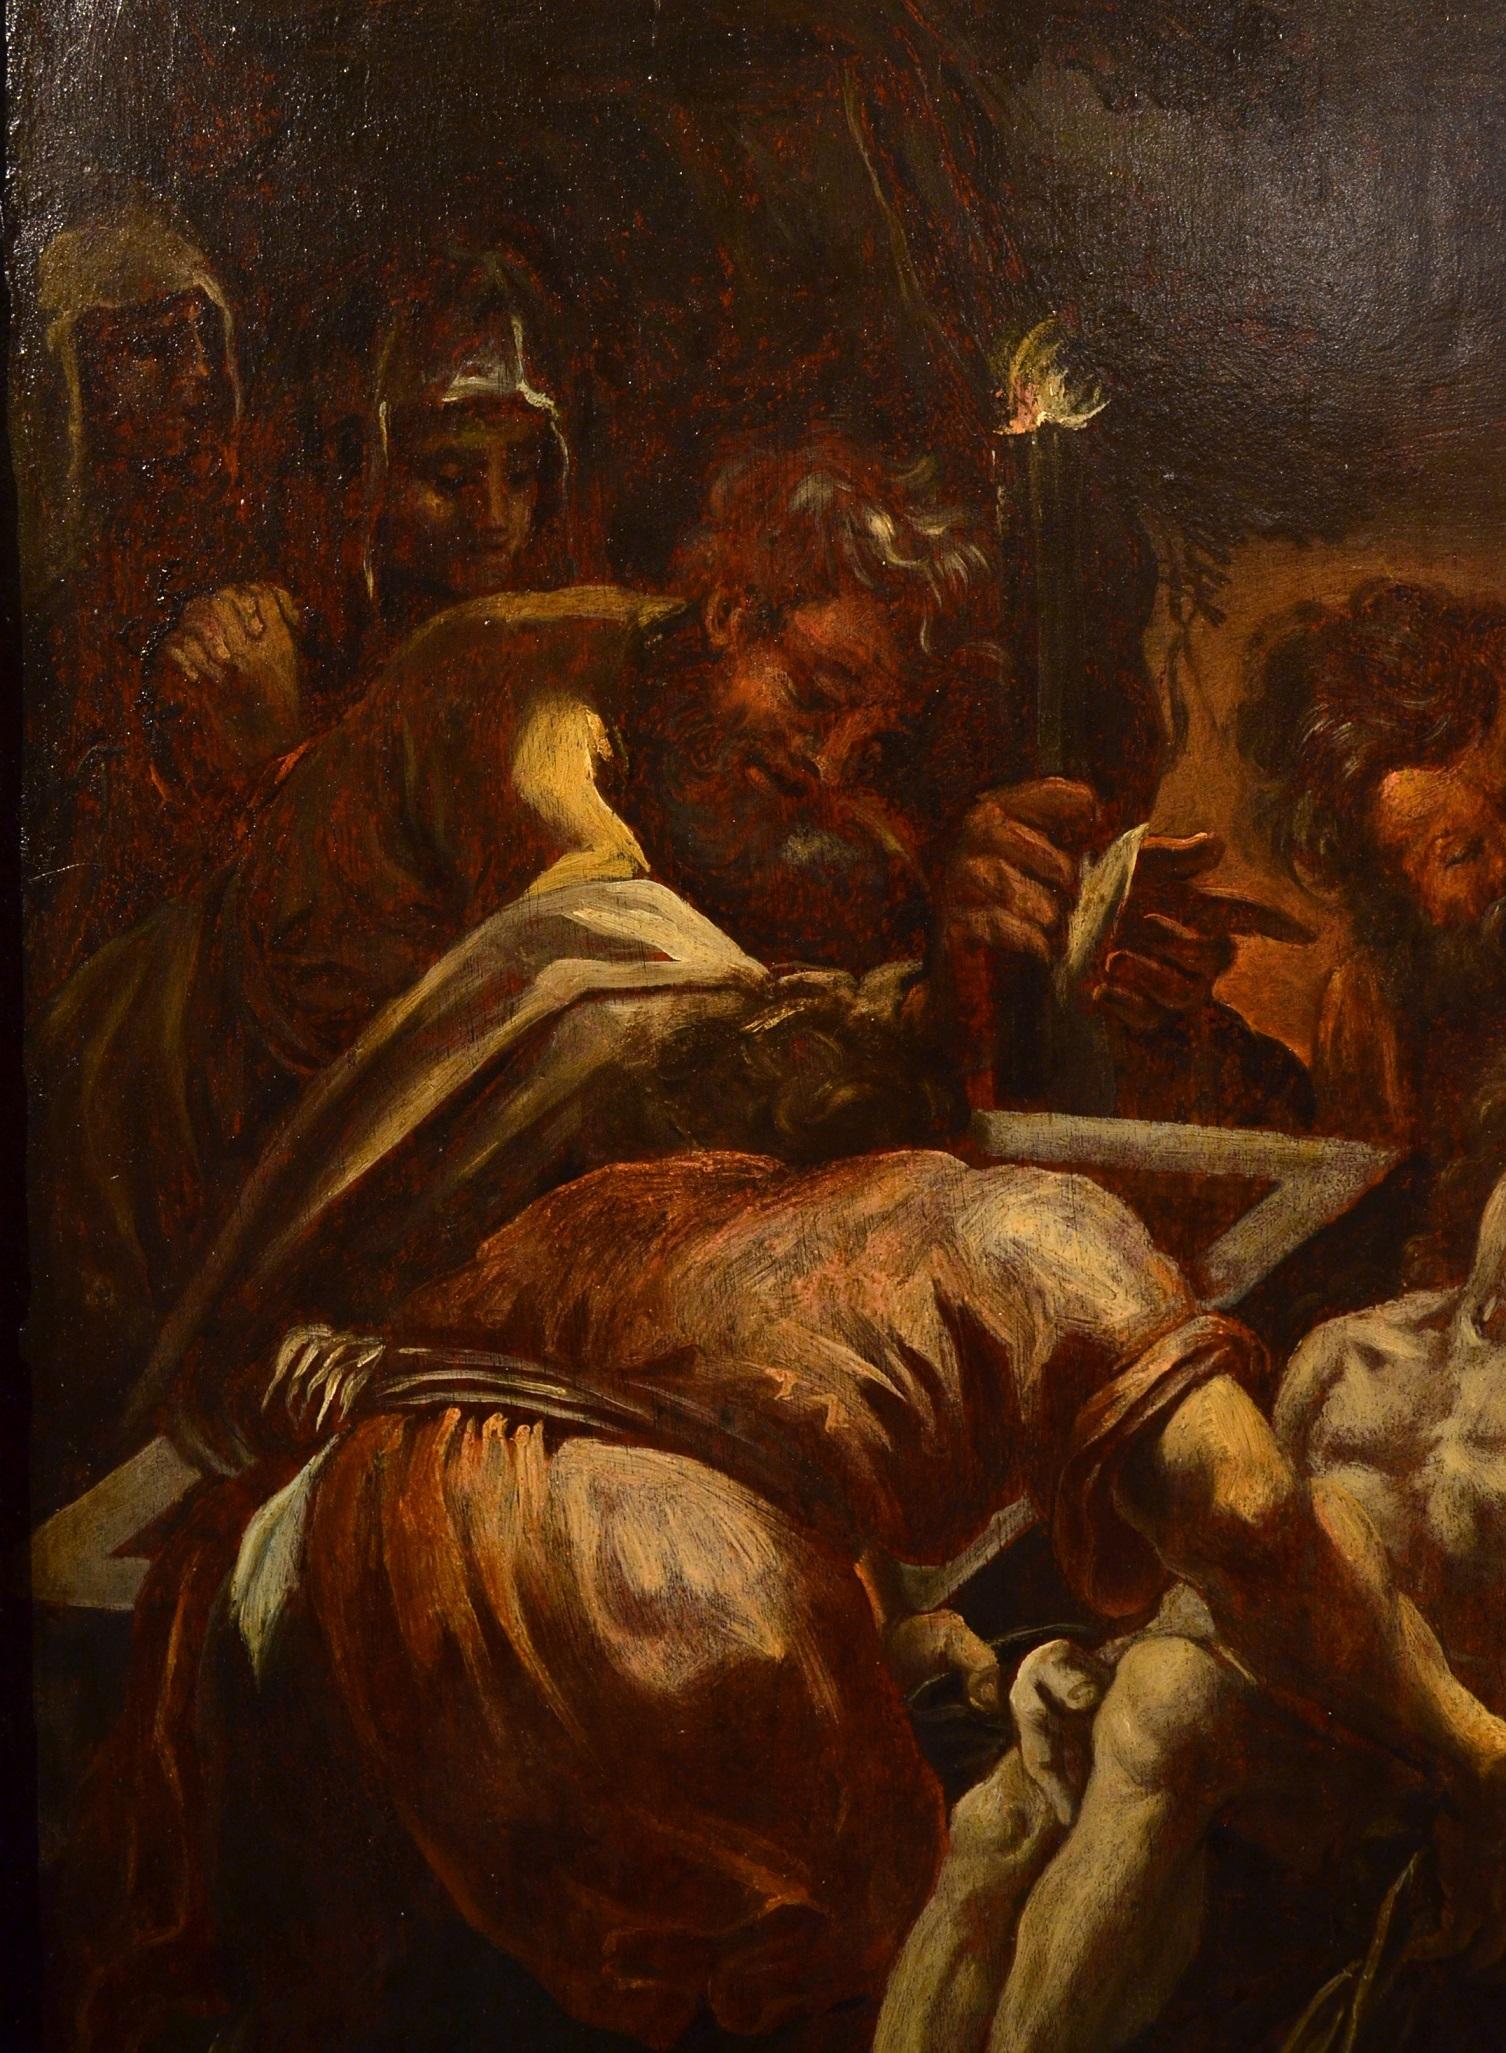 Giulio Cesare Procaccini (Bologna 1574 - Milan 1625) workshop of
The Deposition of Christ in the sepulcher

Lombard school early 1600s
Oil on wood, cm. 67 x 48
In frame cm. 76 x 57

Provenance: Franco Semenzato auction in Milan San Paolo Converso